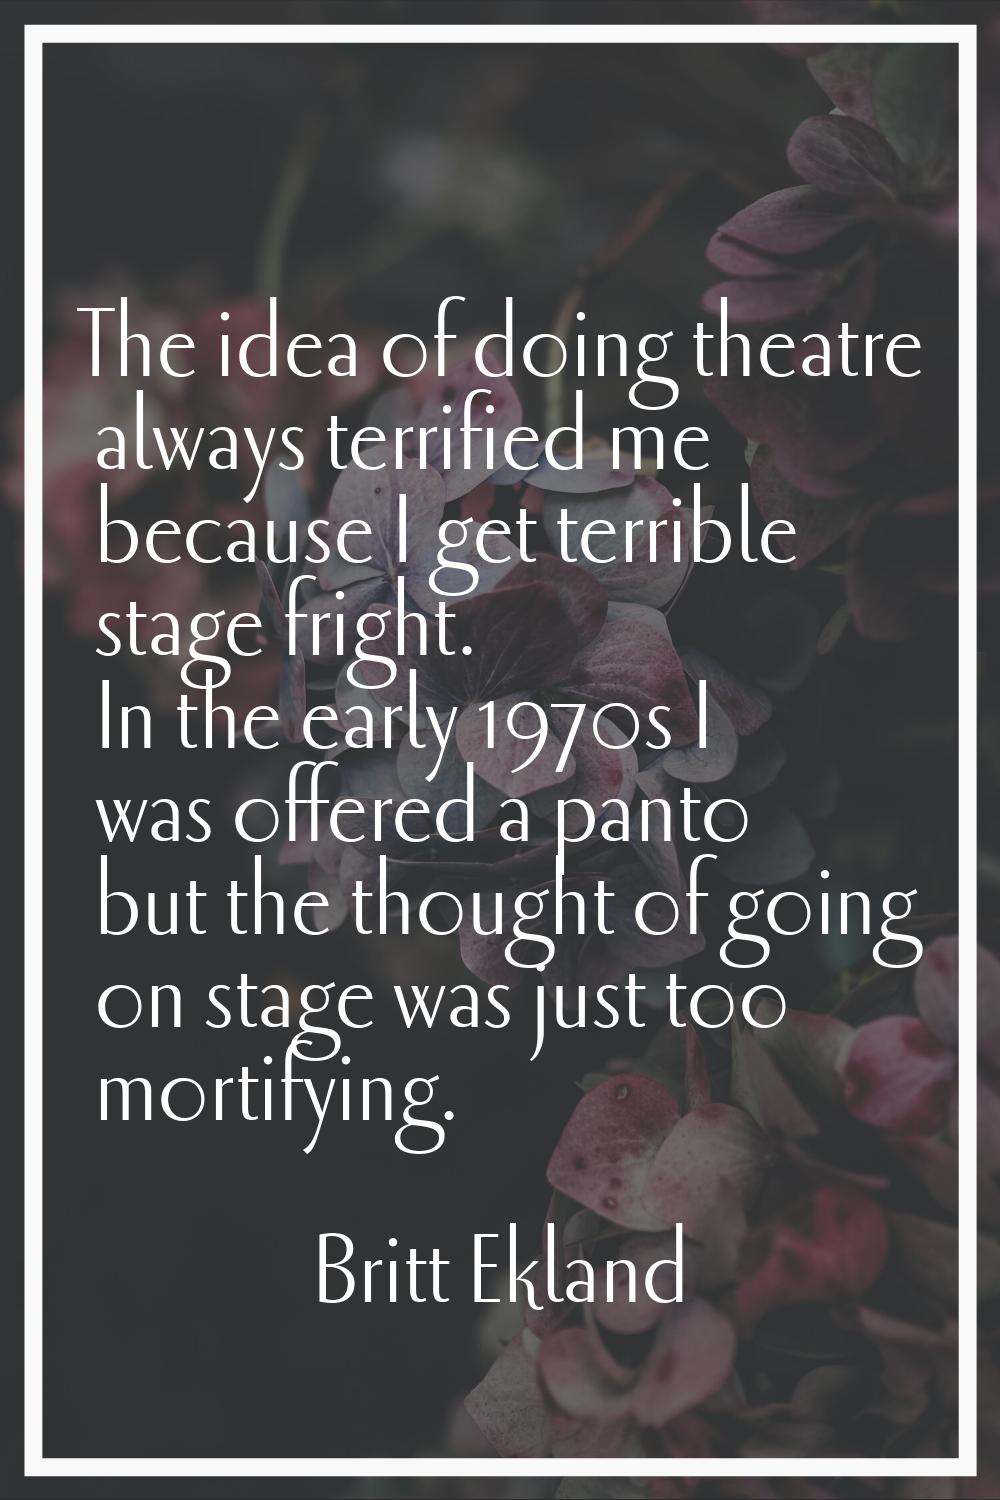 The idea of doing theatre always terrified me because I get terrible stage fright. In the early 197